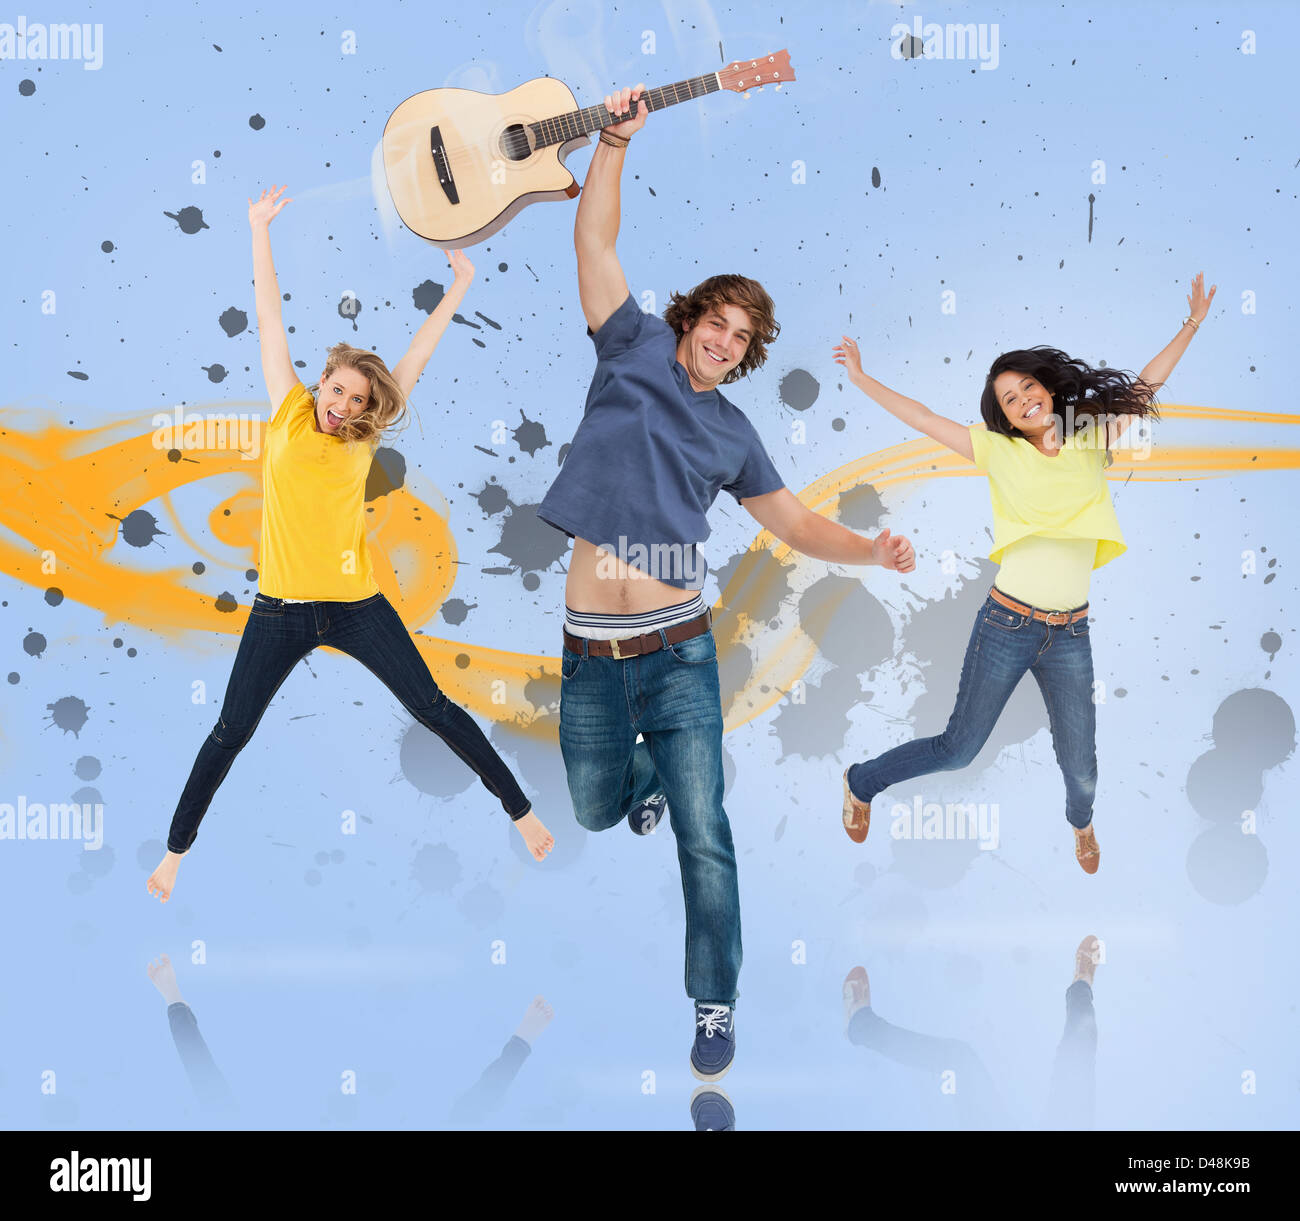 Young man with guitar and two girls jumping for joy Stock Photo